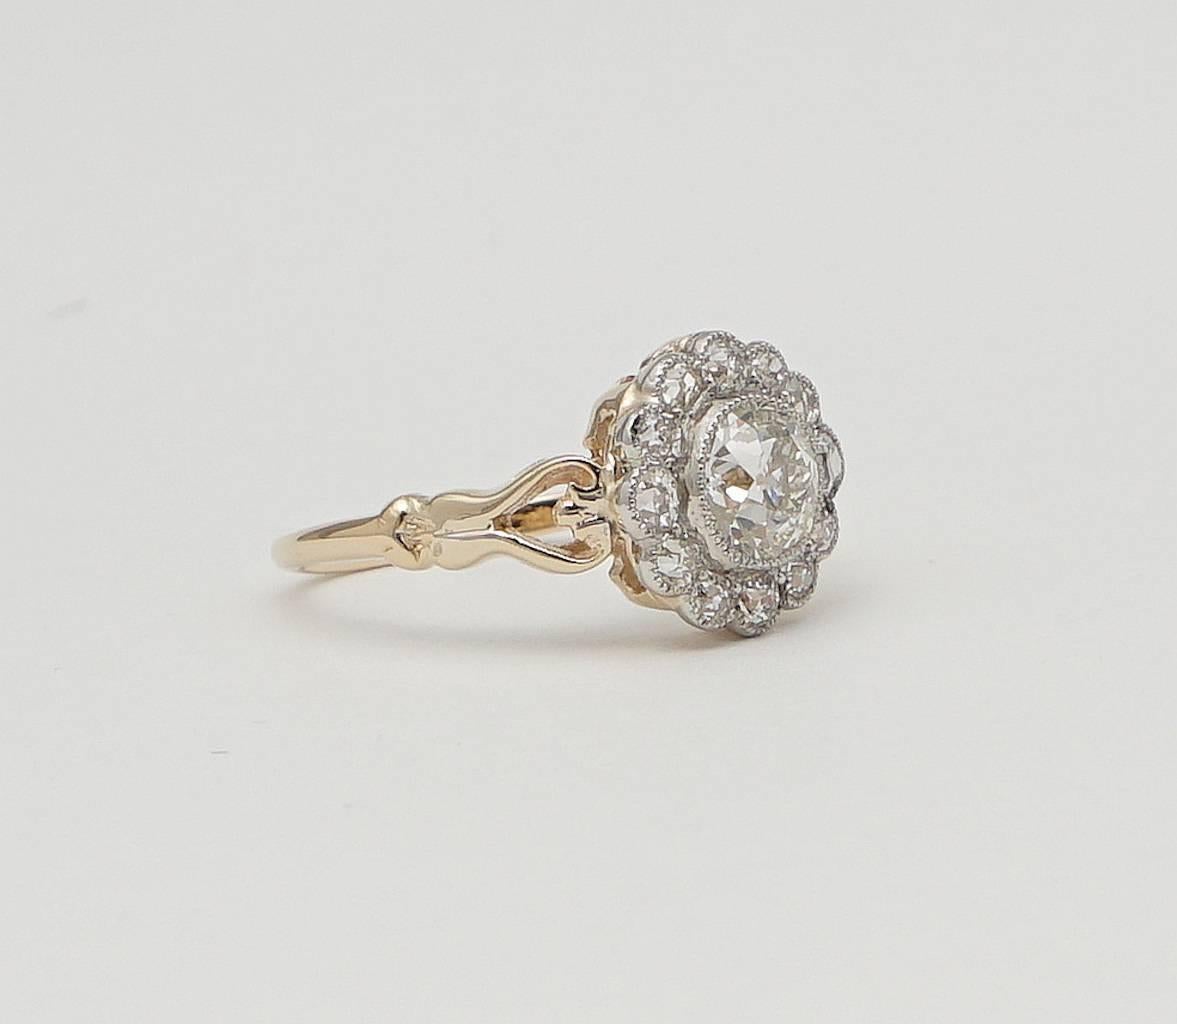 A beautiful original edwardian period diamond engagement ring in luxurious platinum and 18 karat yellow gold. Centered by a sparkling antique old European cut diamond surrounded by a dozen accenting old European cut diamonds this ring features a